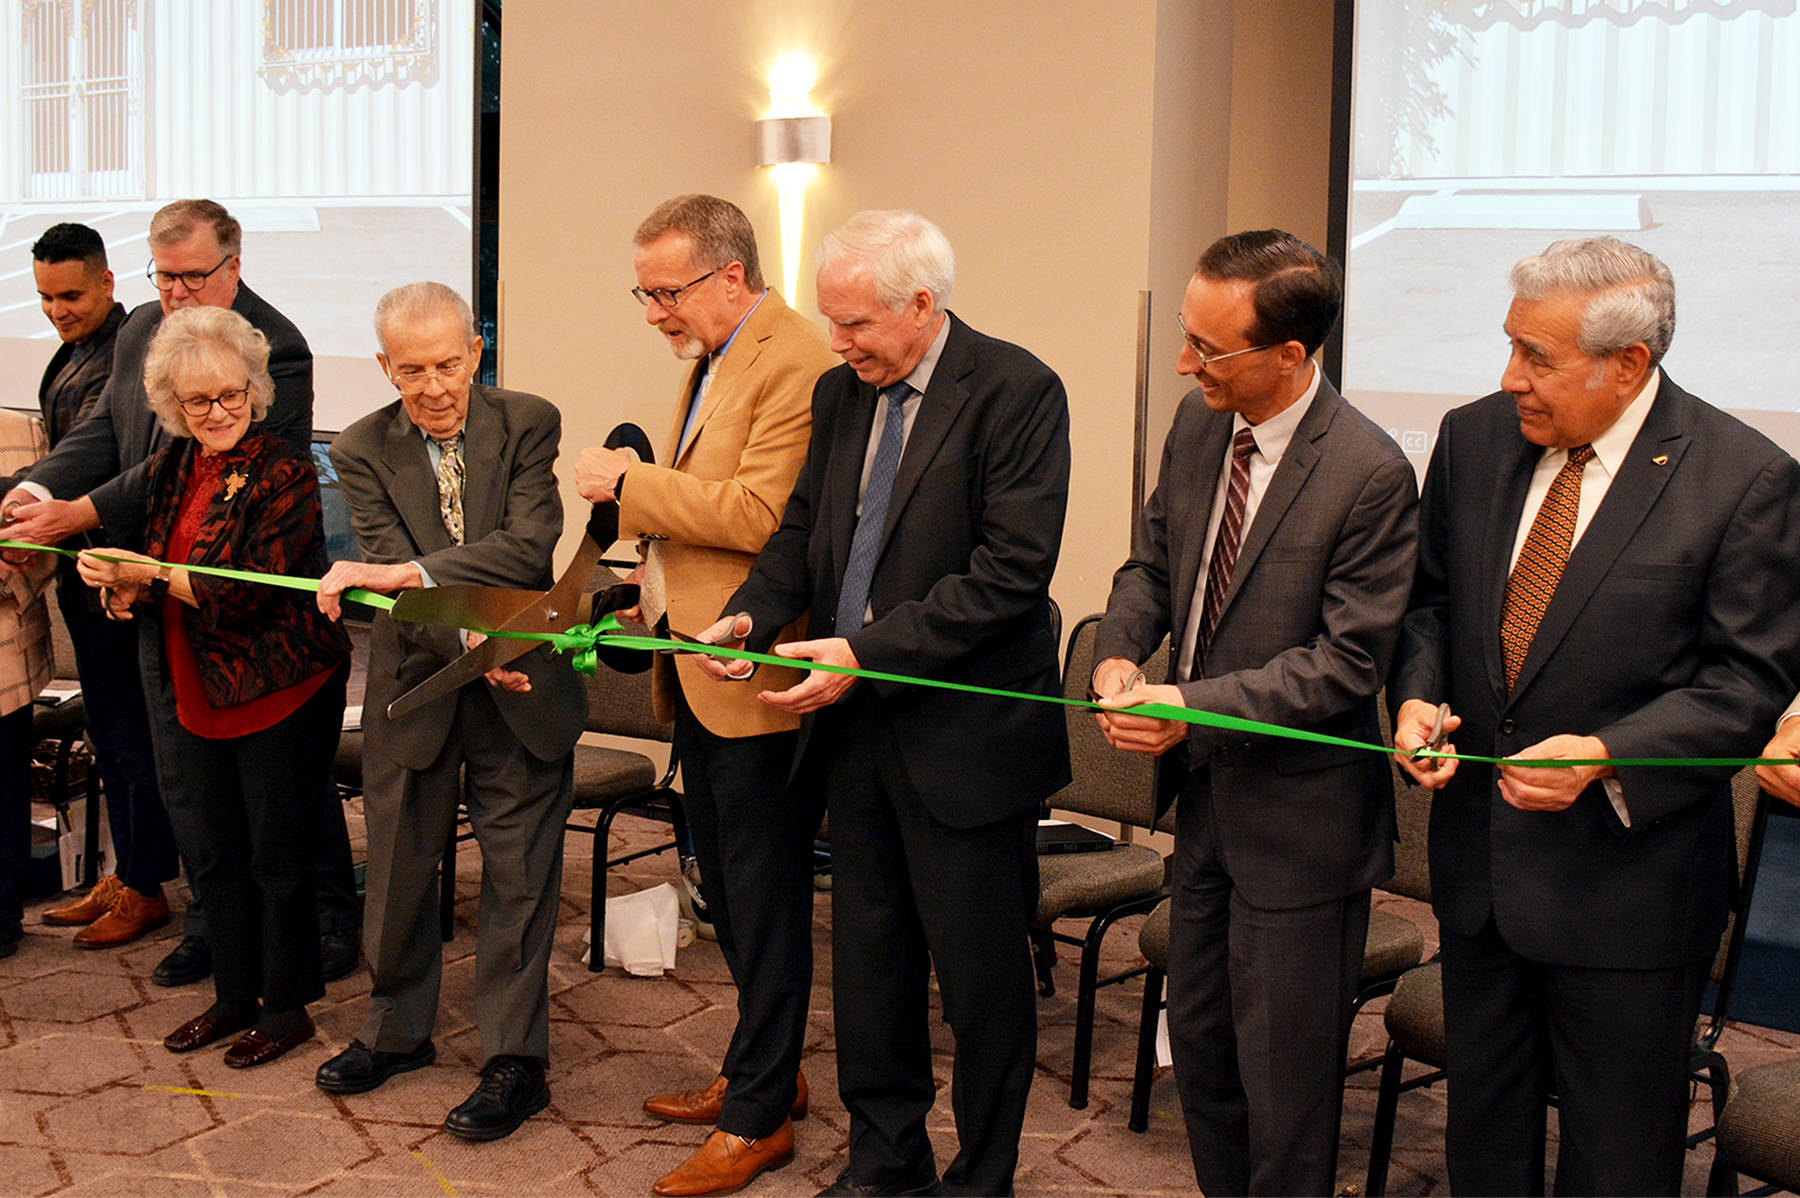 Randy Roberts, senior pastor of Loma Linda University Church, mans the oversize scissors as he and the other dignitaries prepare to cut the ceremonial ribbon for the Loma Linda University Church Literature Ministry Distribution and Training Center. 